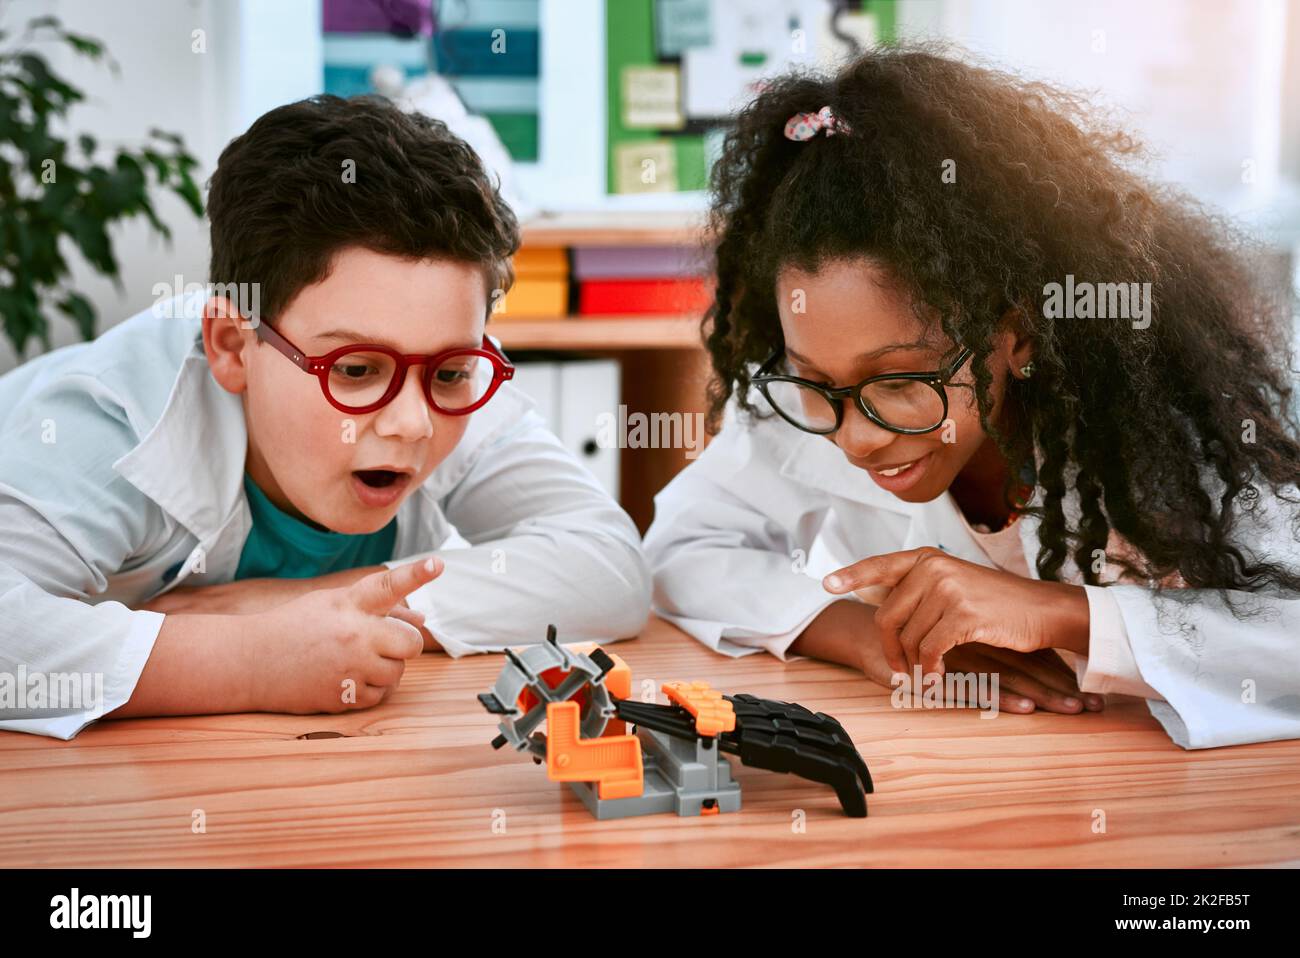 Fun and learning go hand in hand. Shot of an adorable little boy and girl building a robot in science class at school. Stock Photo